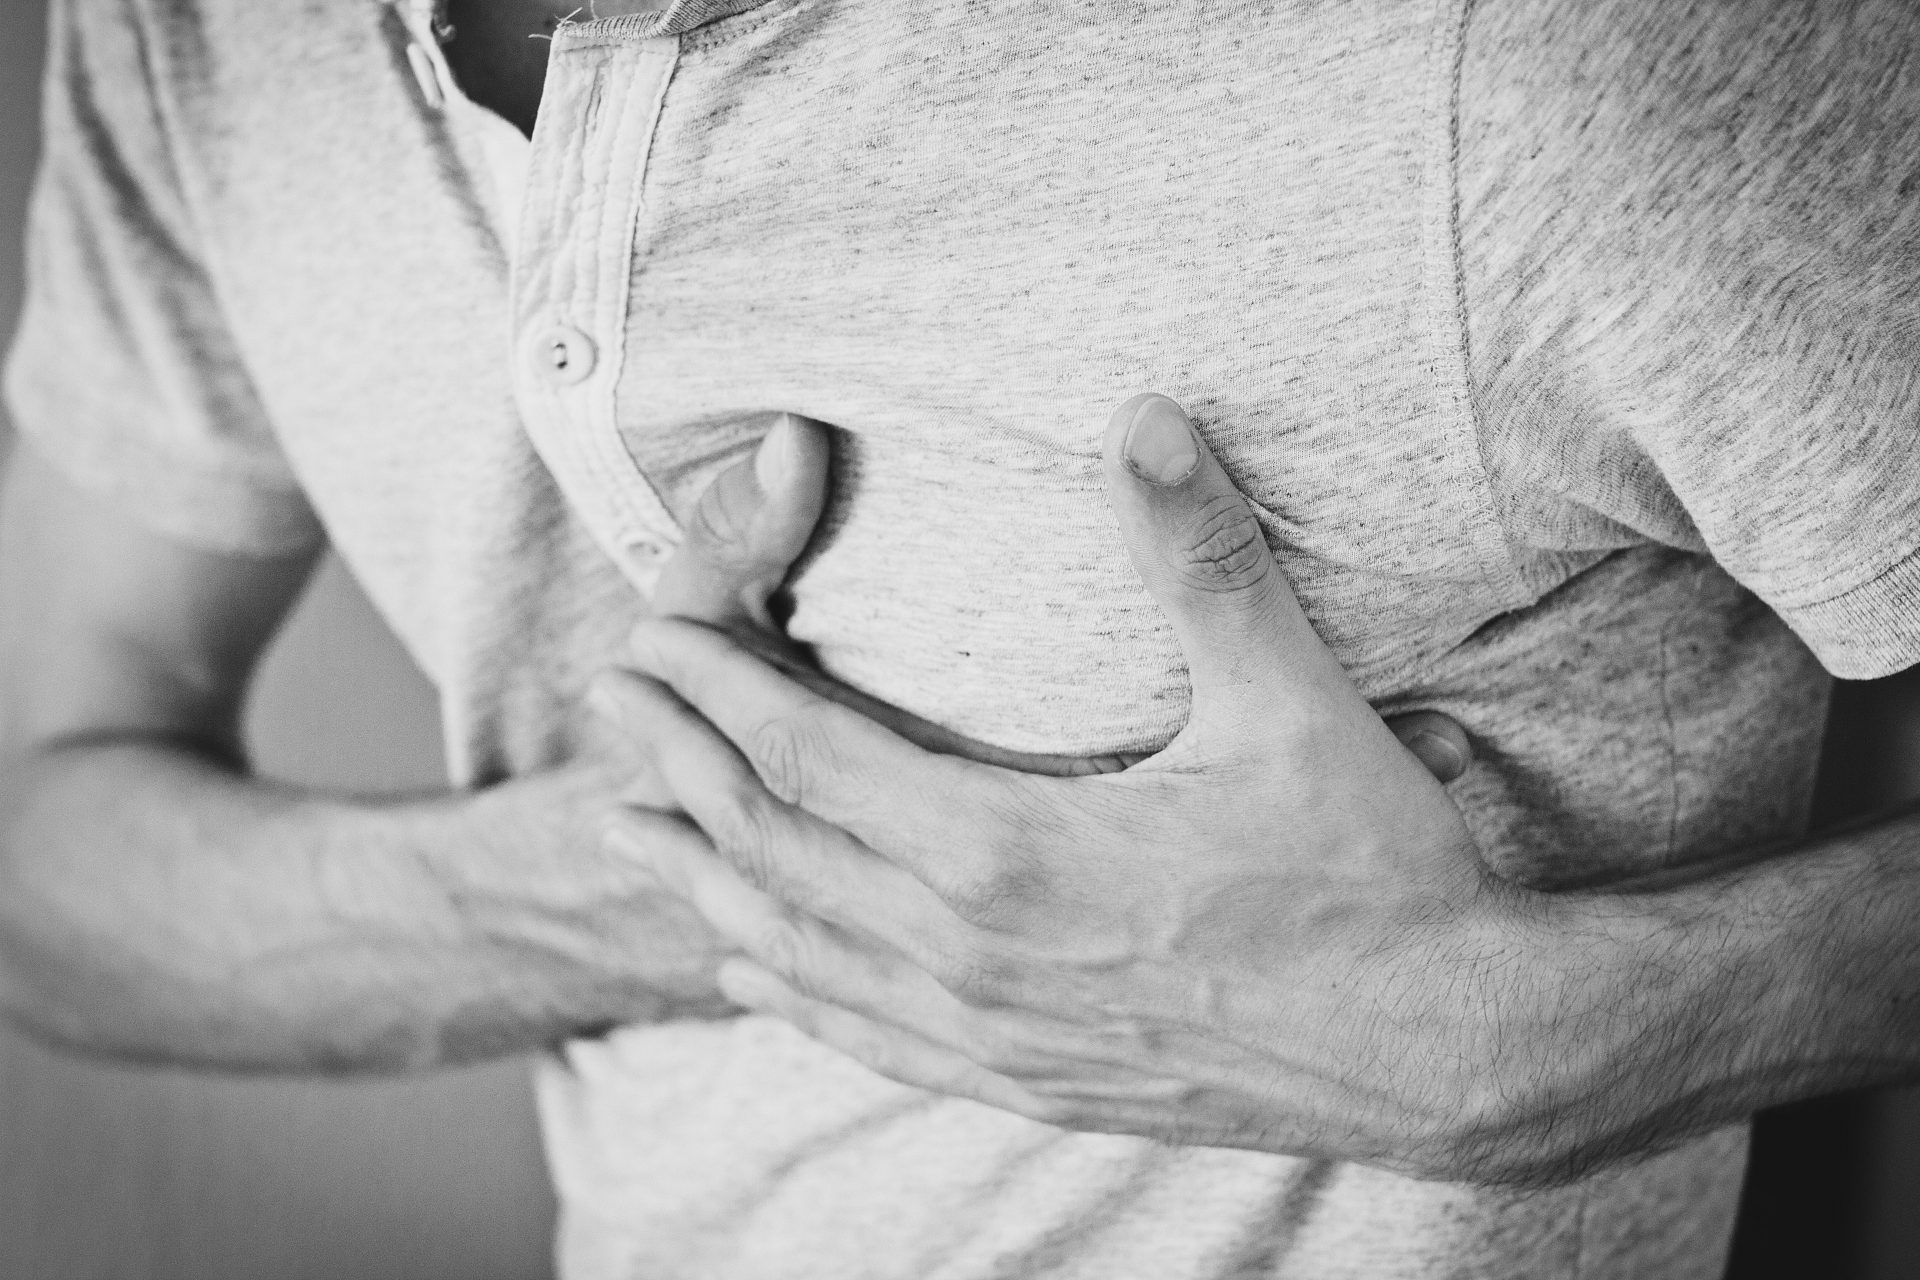 Heart attack. Photo by freestocks.org from Pexels